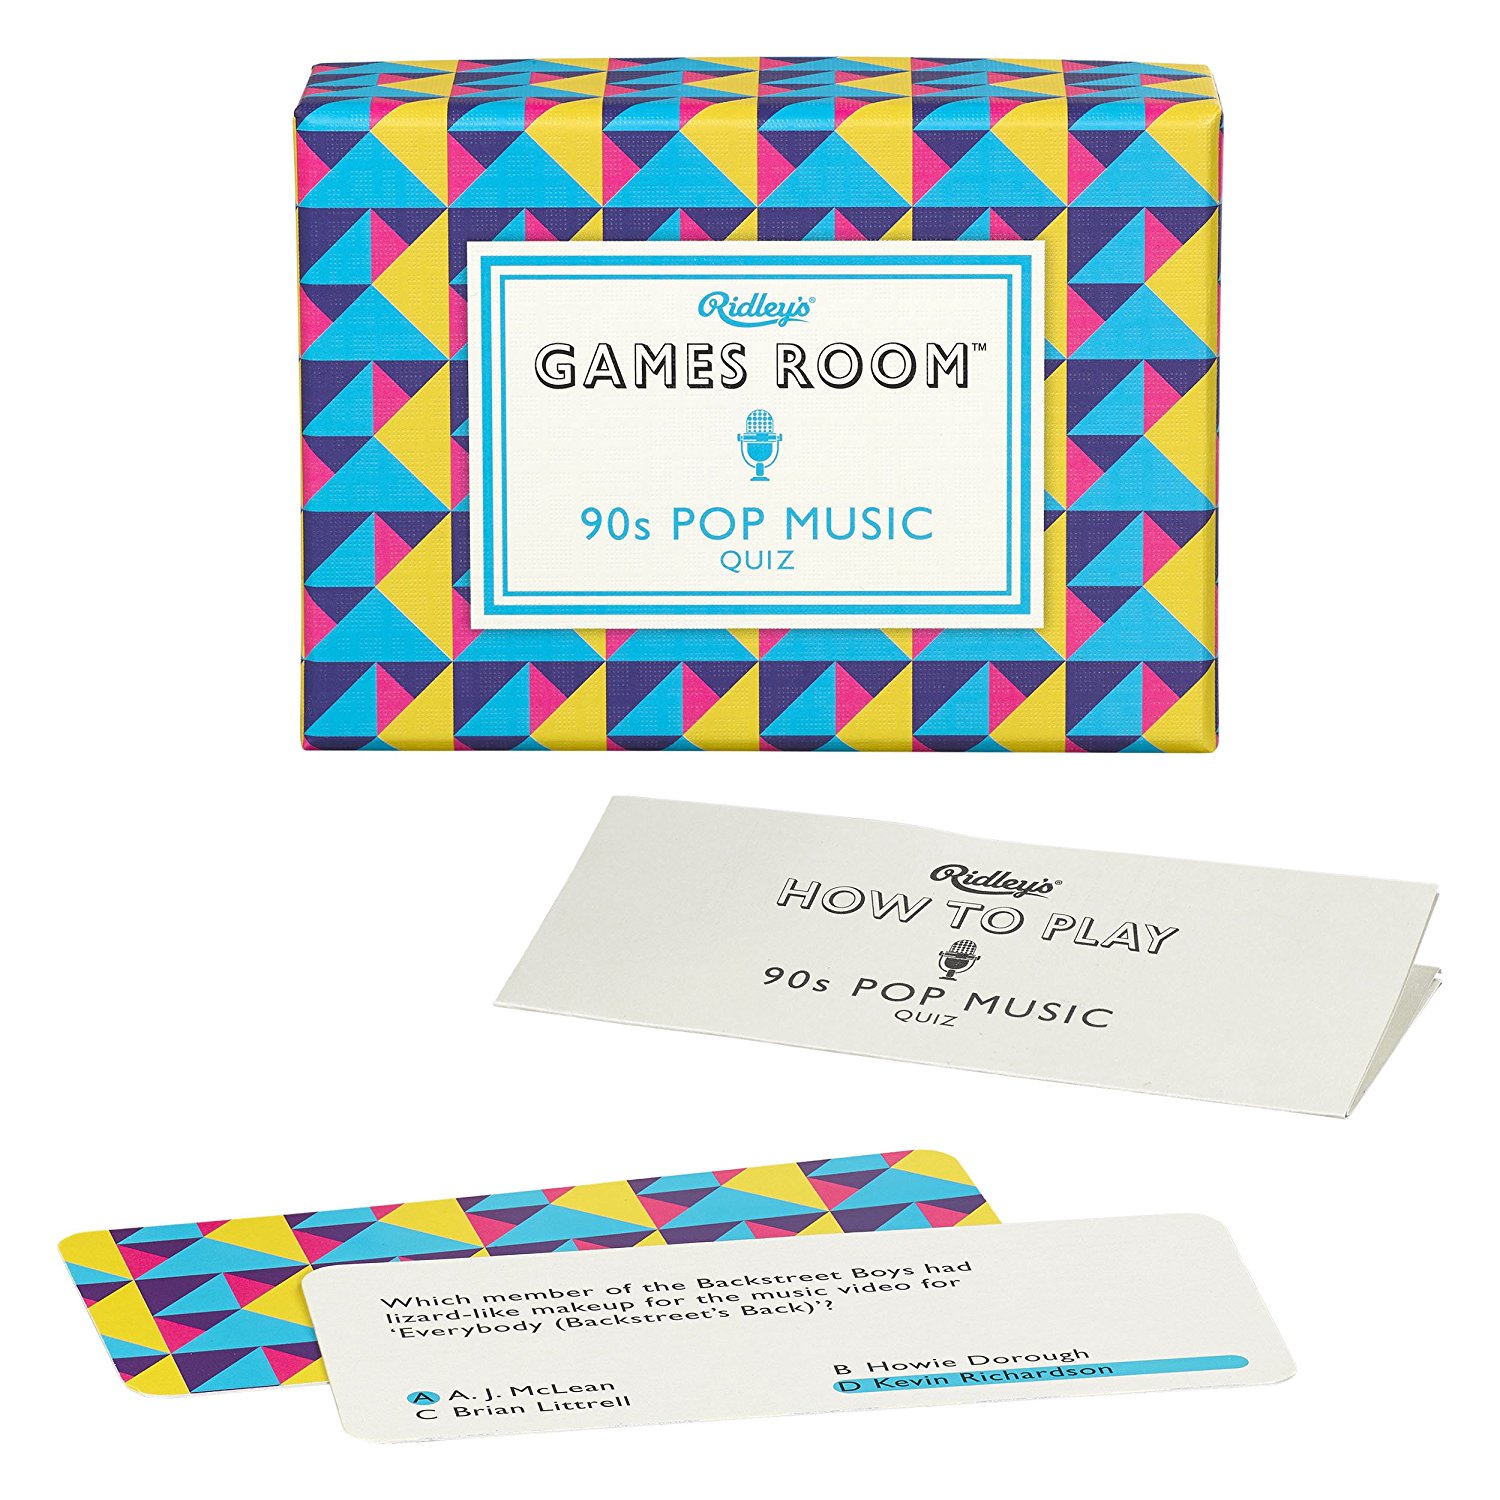 Games Room 90's Pop Music Quiz Trivia Game | Ridley's - 0